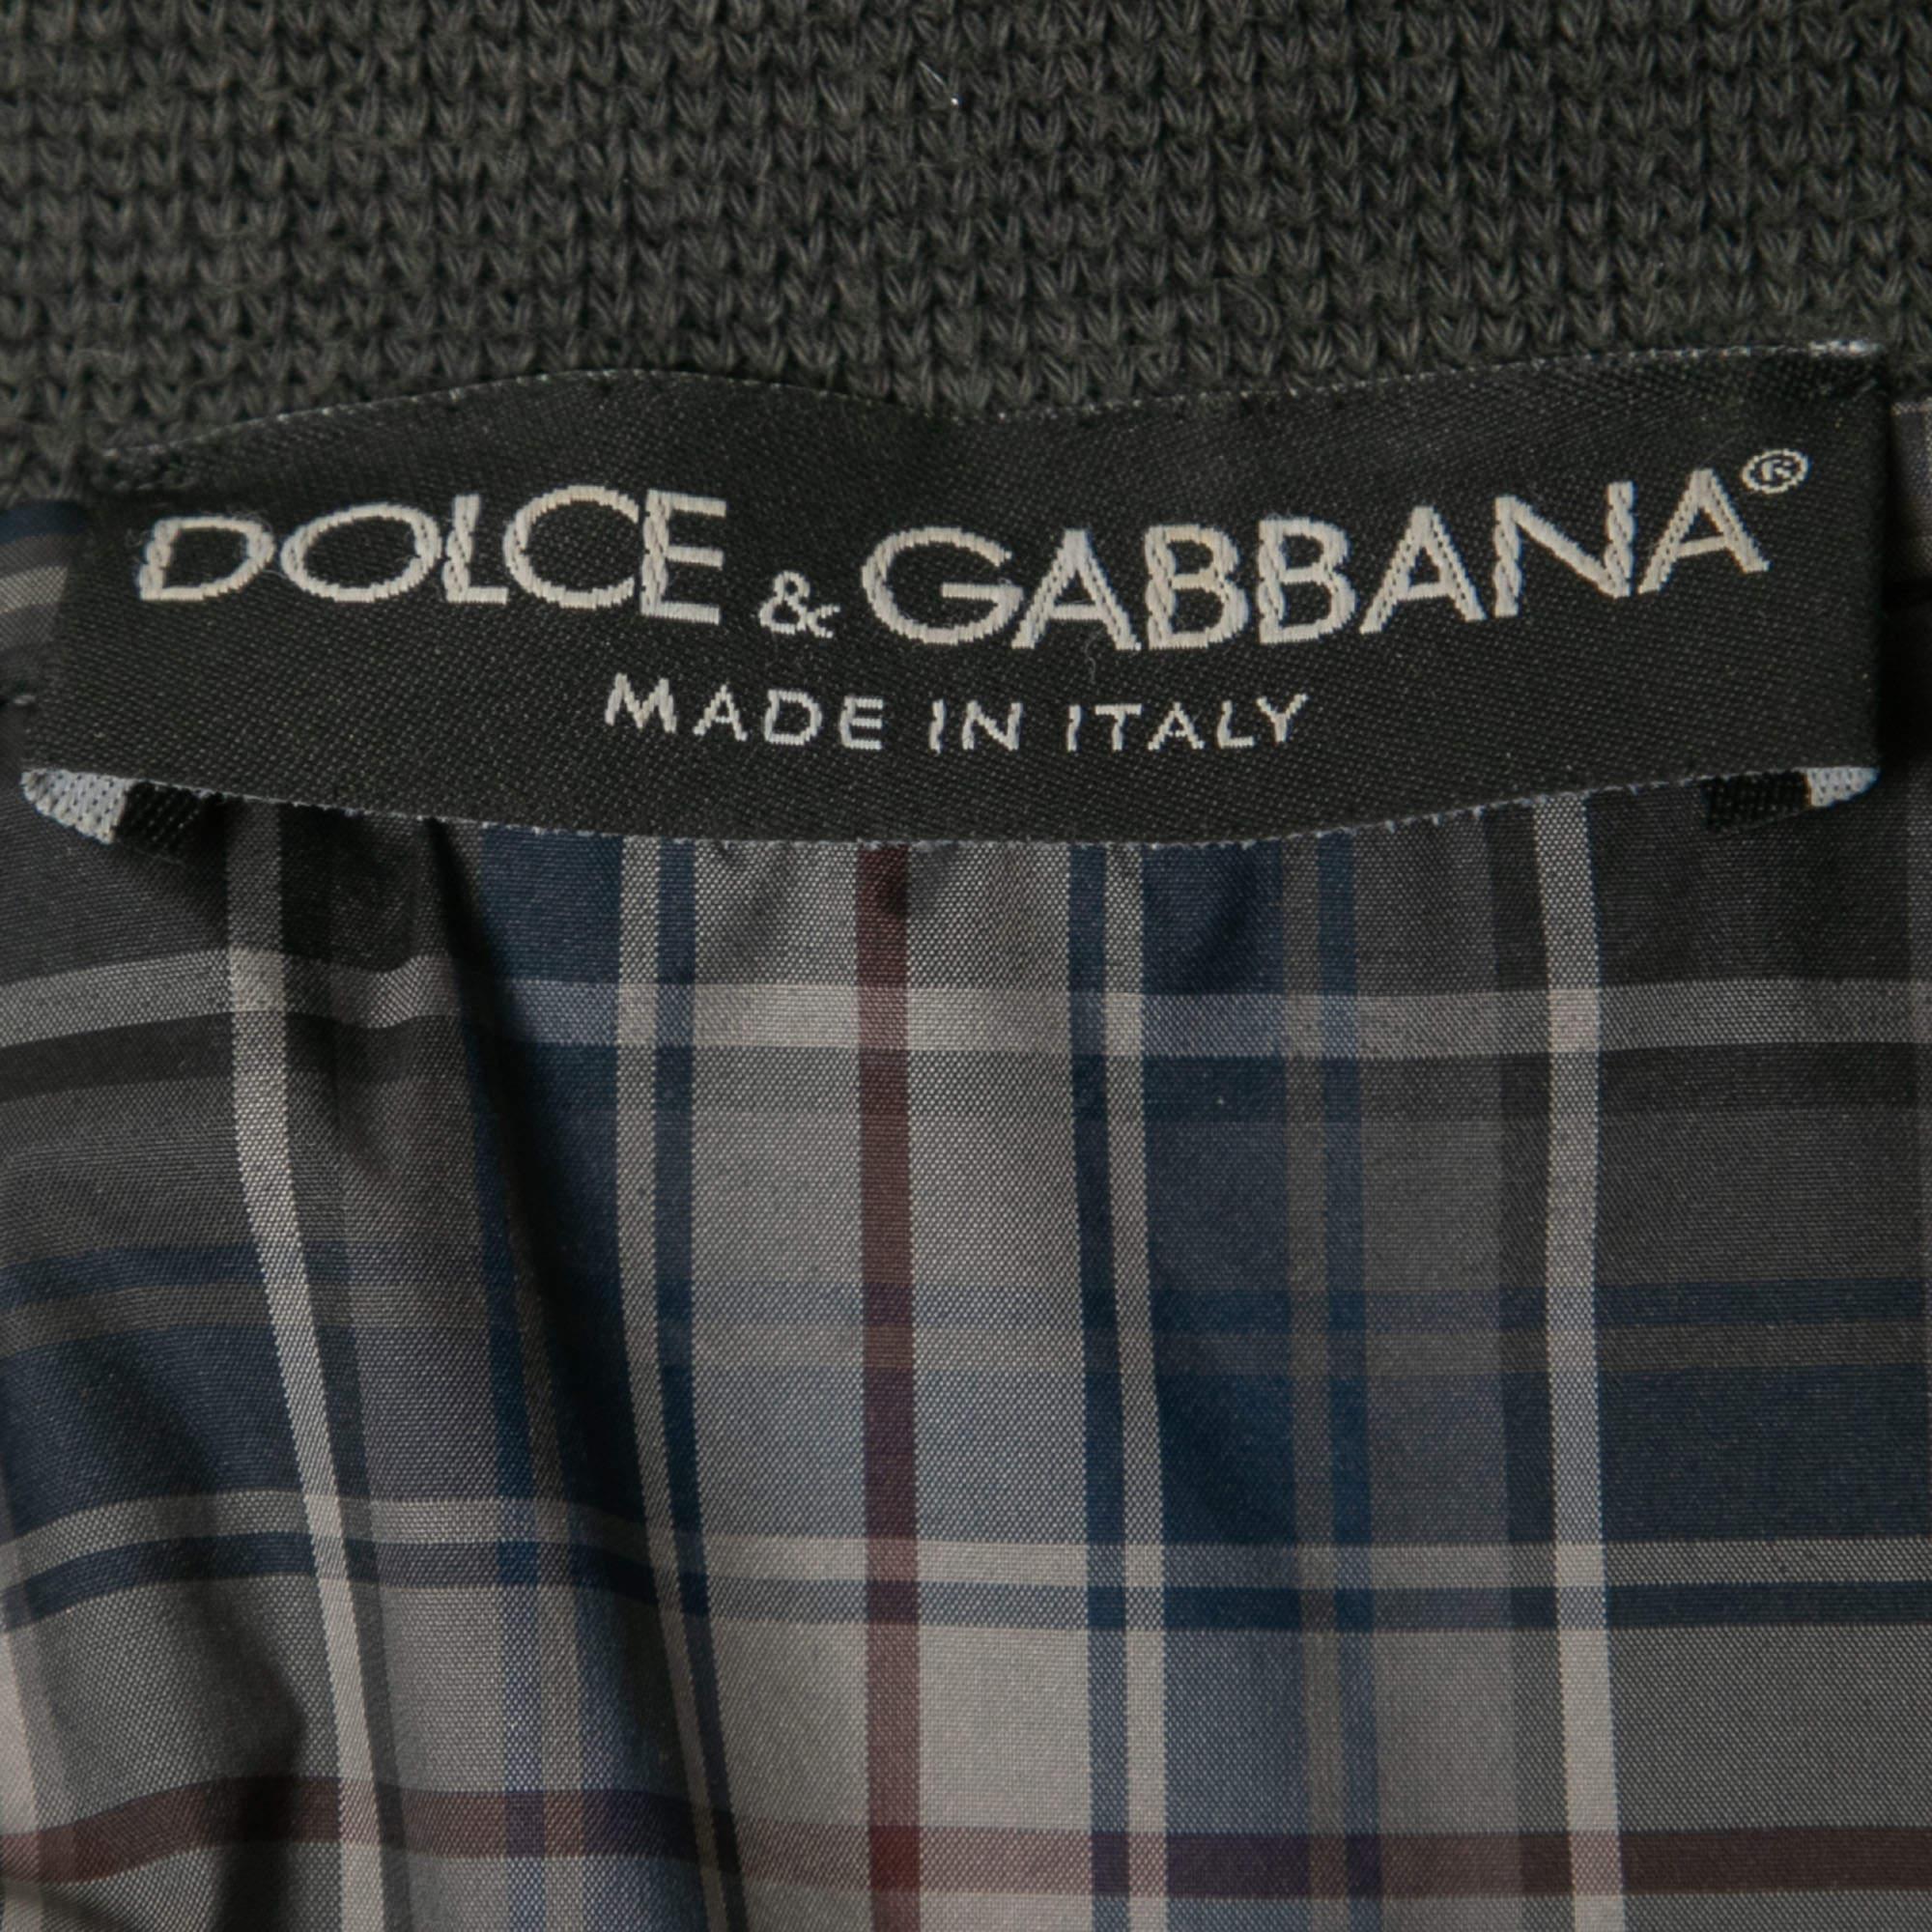 Dolce & Gabbana Black Perforated Cotton Rib Knit Detail Jacket  In Good Condition For Sale In Dubai, Al Qouz 2